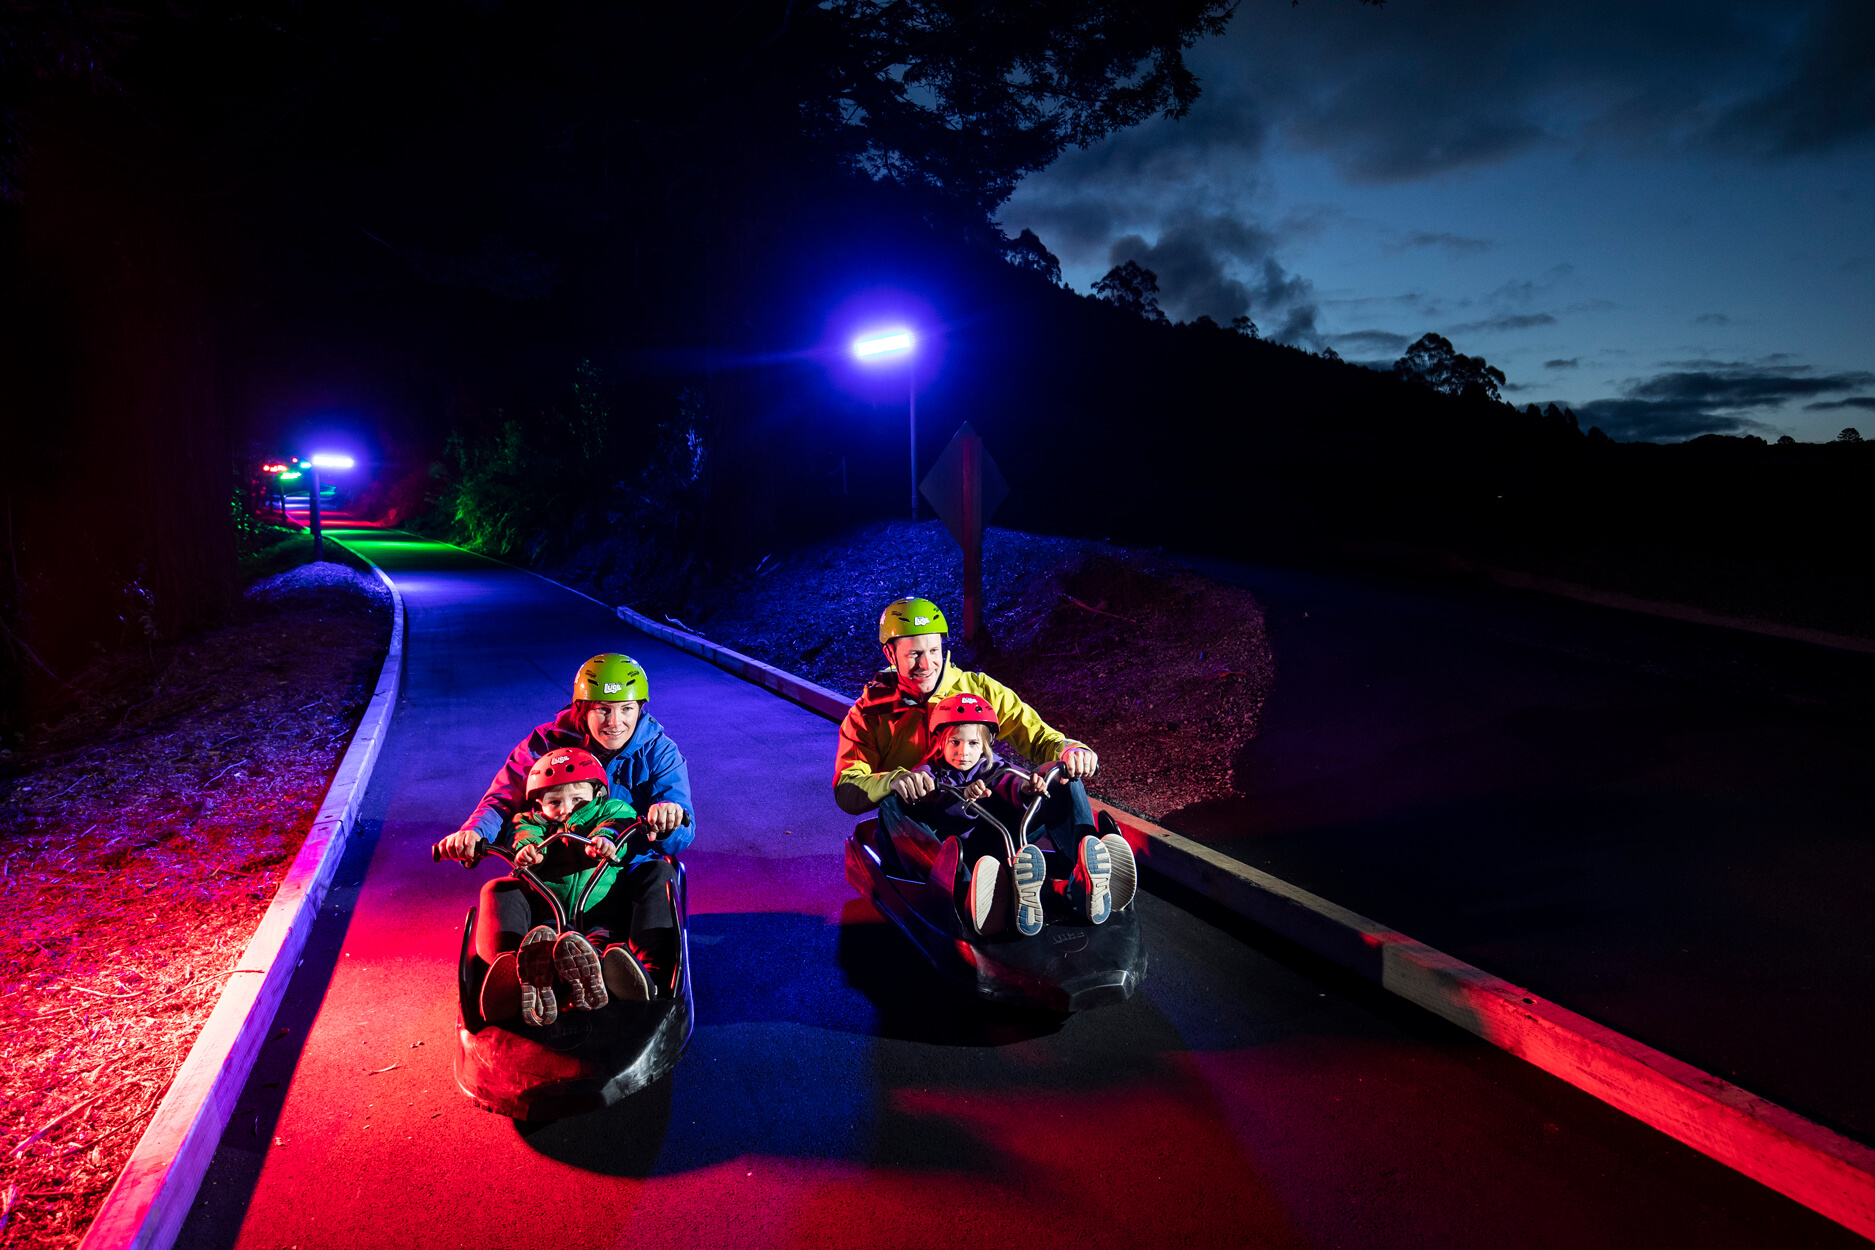 skyline rotorua luge a family riding down the luge tracks at night 1